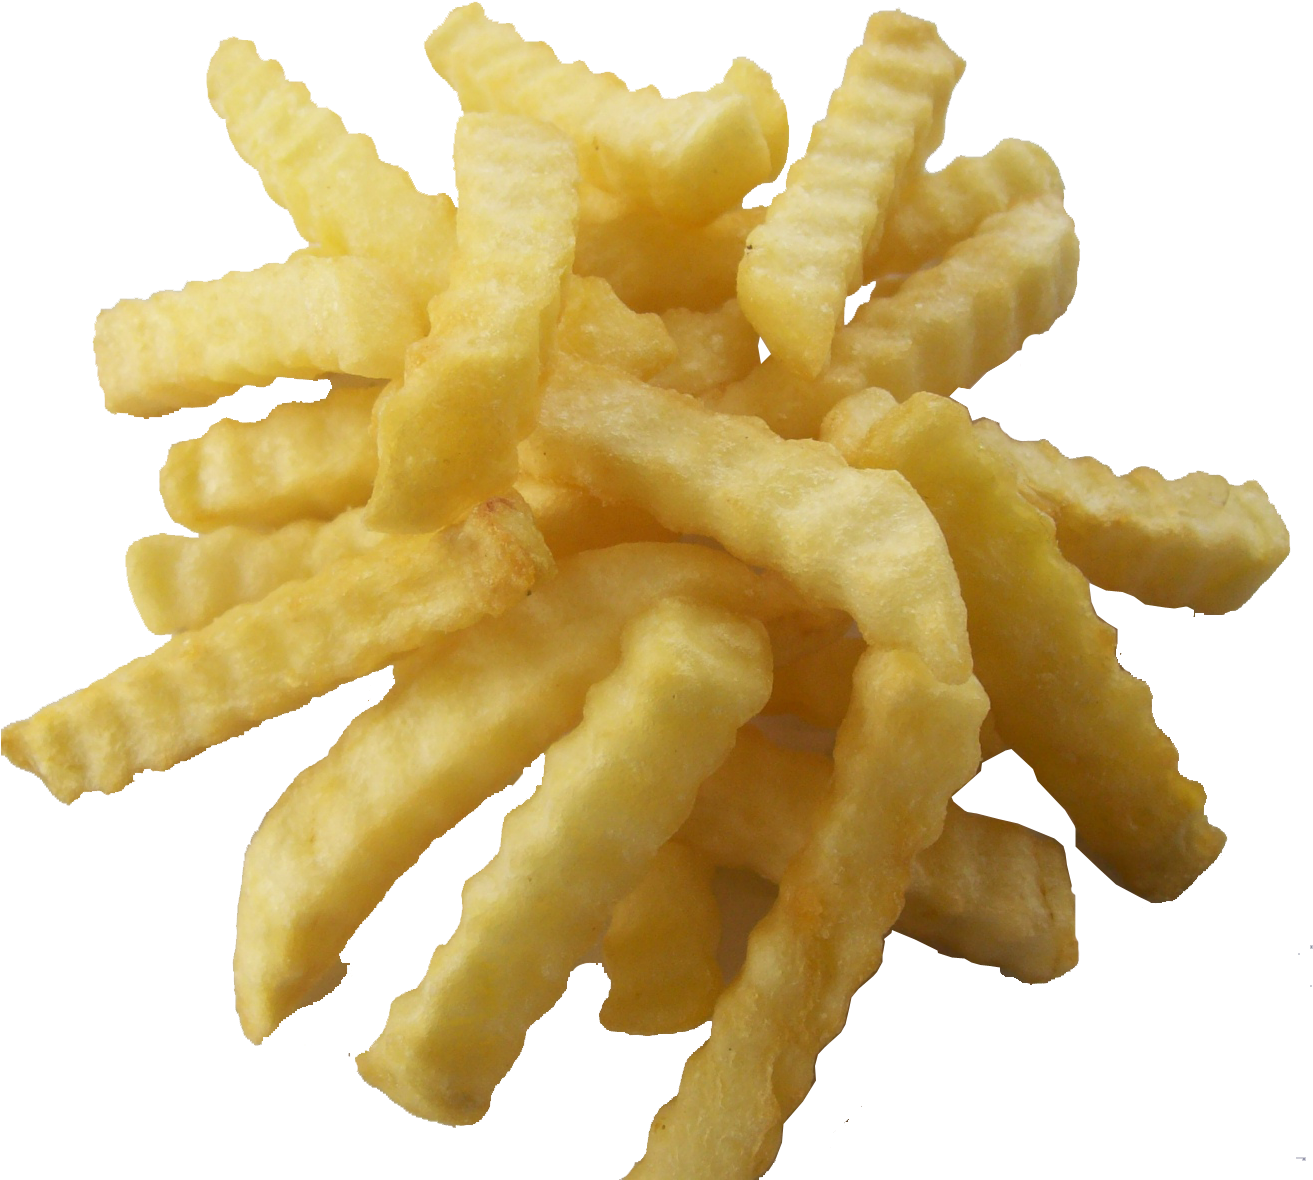 A Pile Of French Fries